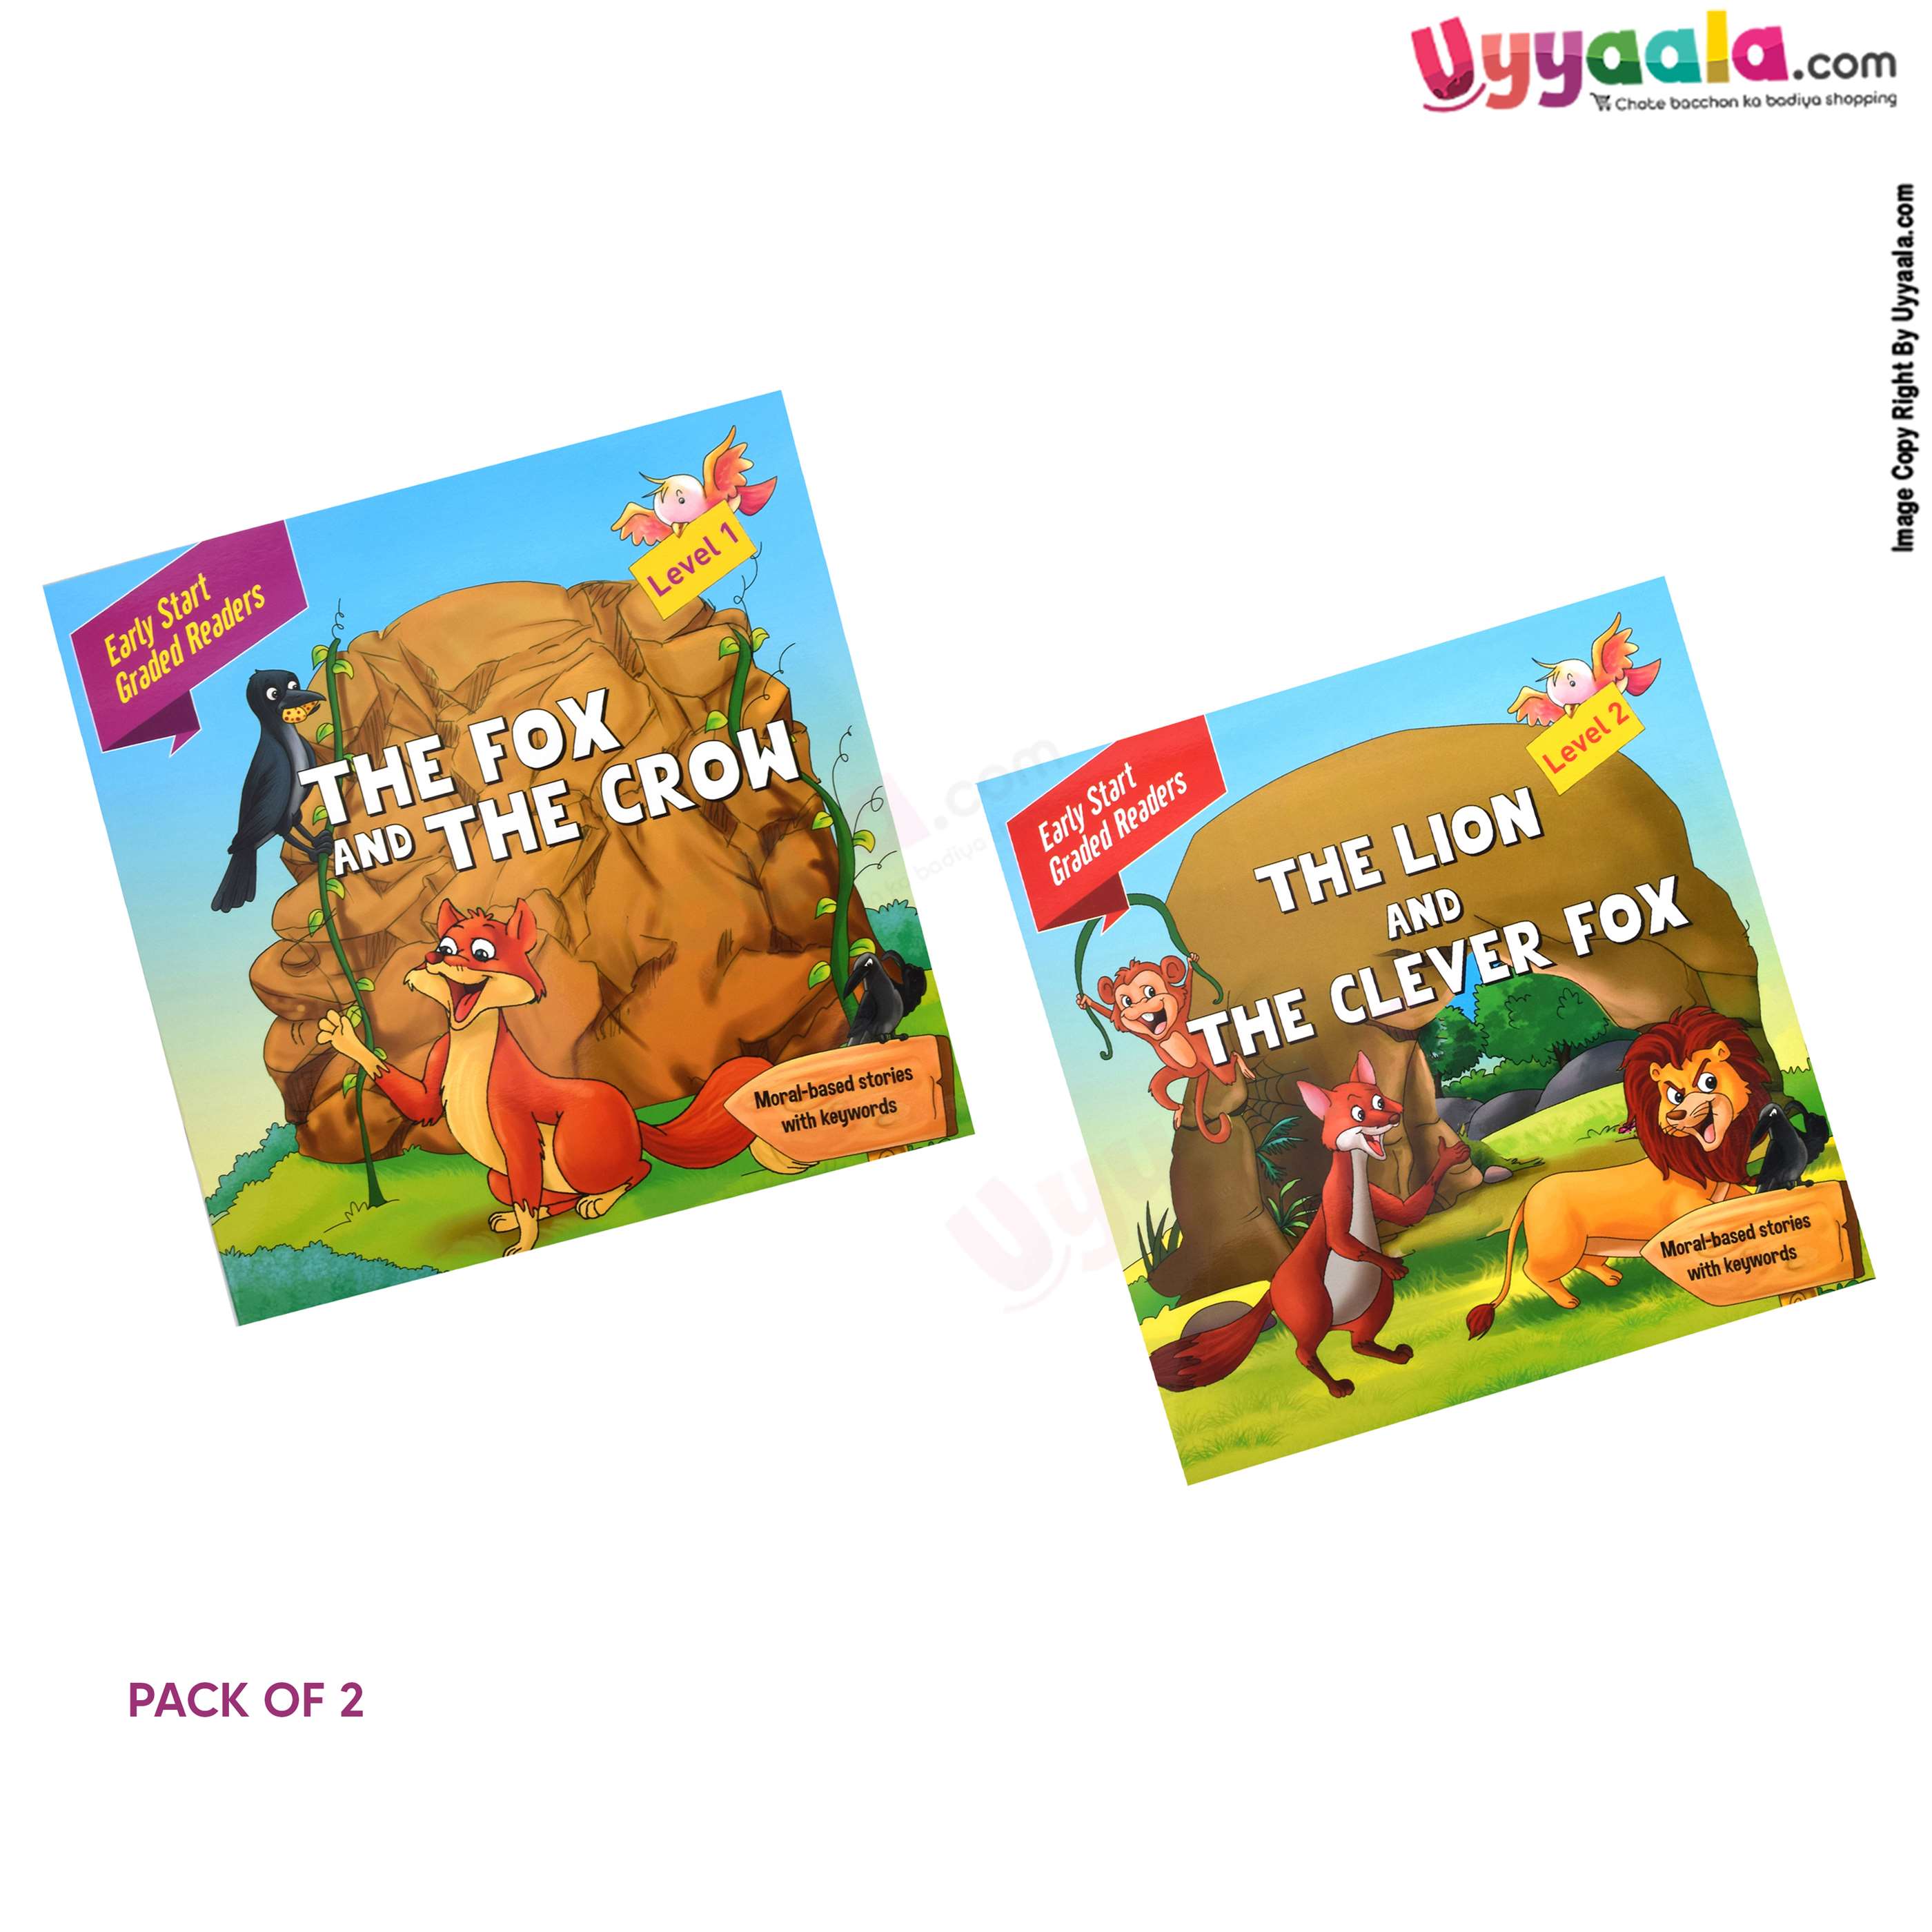 Early start graded readers - the fox and the crow & the lion and the clever fox - pack of 2 - 2 volumes (2 - 5 years)